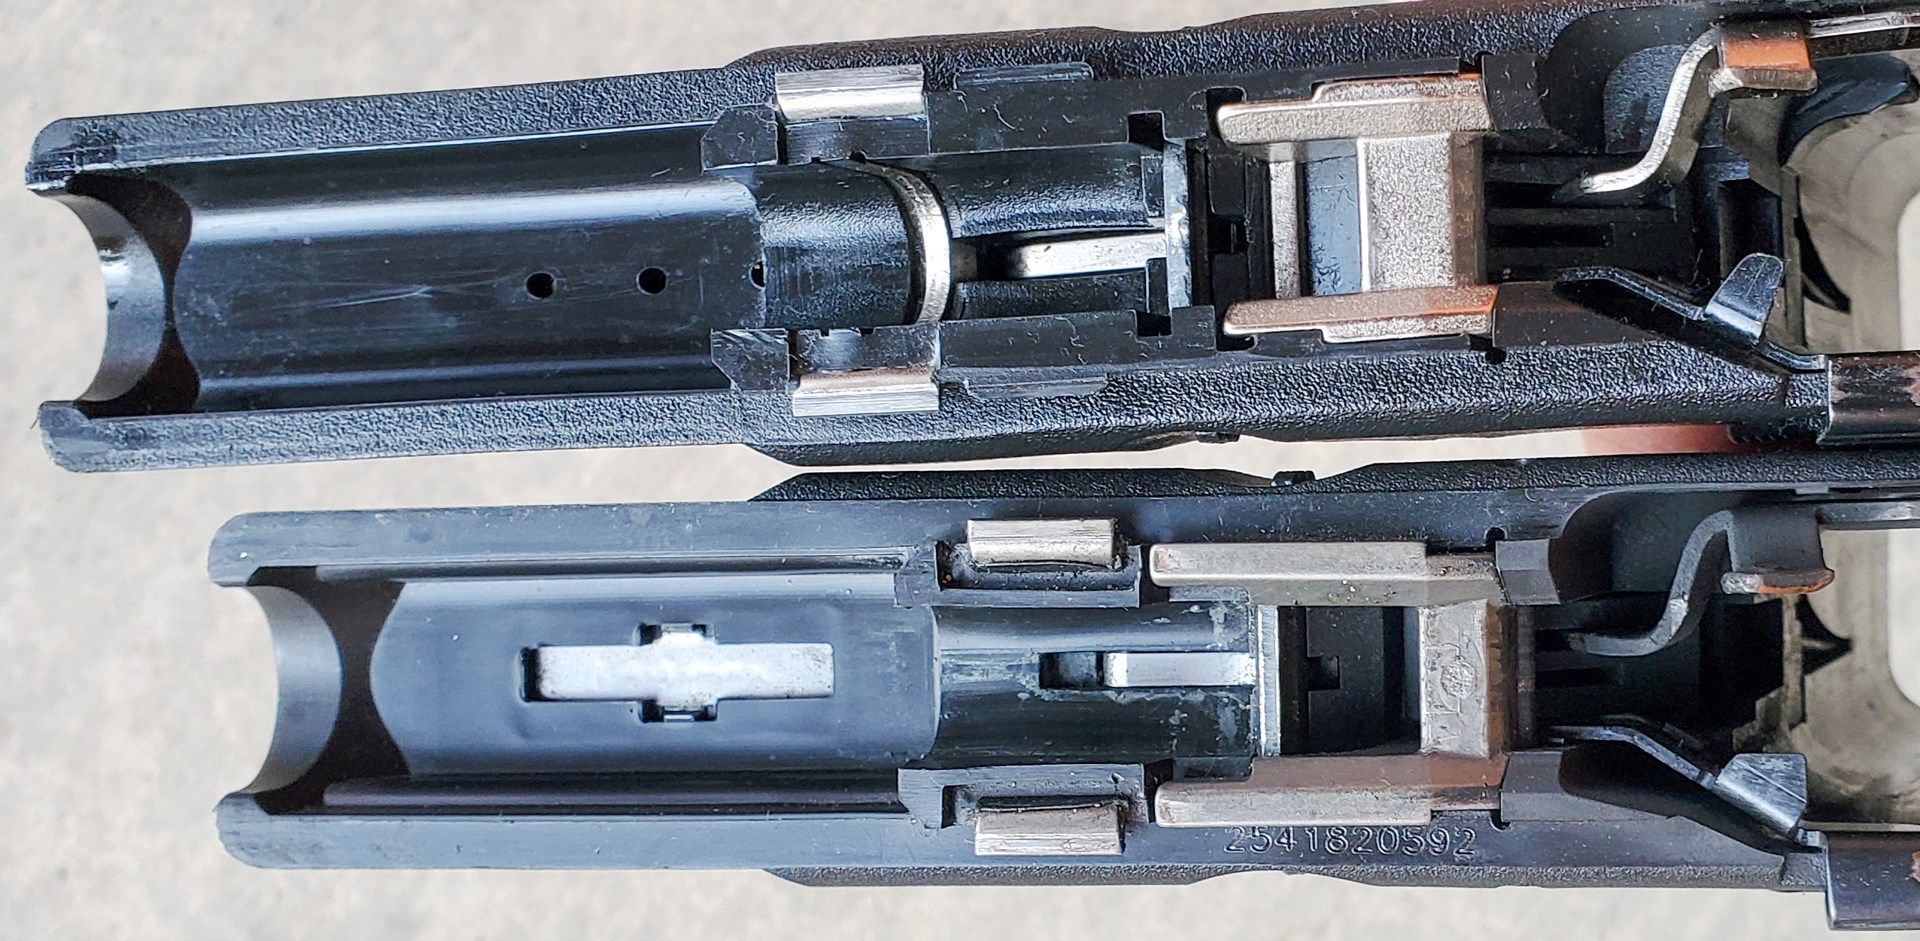 The two "legacy" photos are of pre-Gen5 Glock 17 and 19 frames side-by-side.  Note the differences in the overall lengths as well as the differences in the locking blocks.  A Gen3 G19 frame is on the bottom with a Gen2 17 frame above.